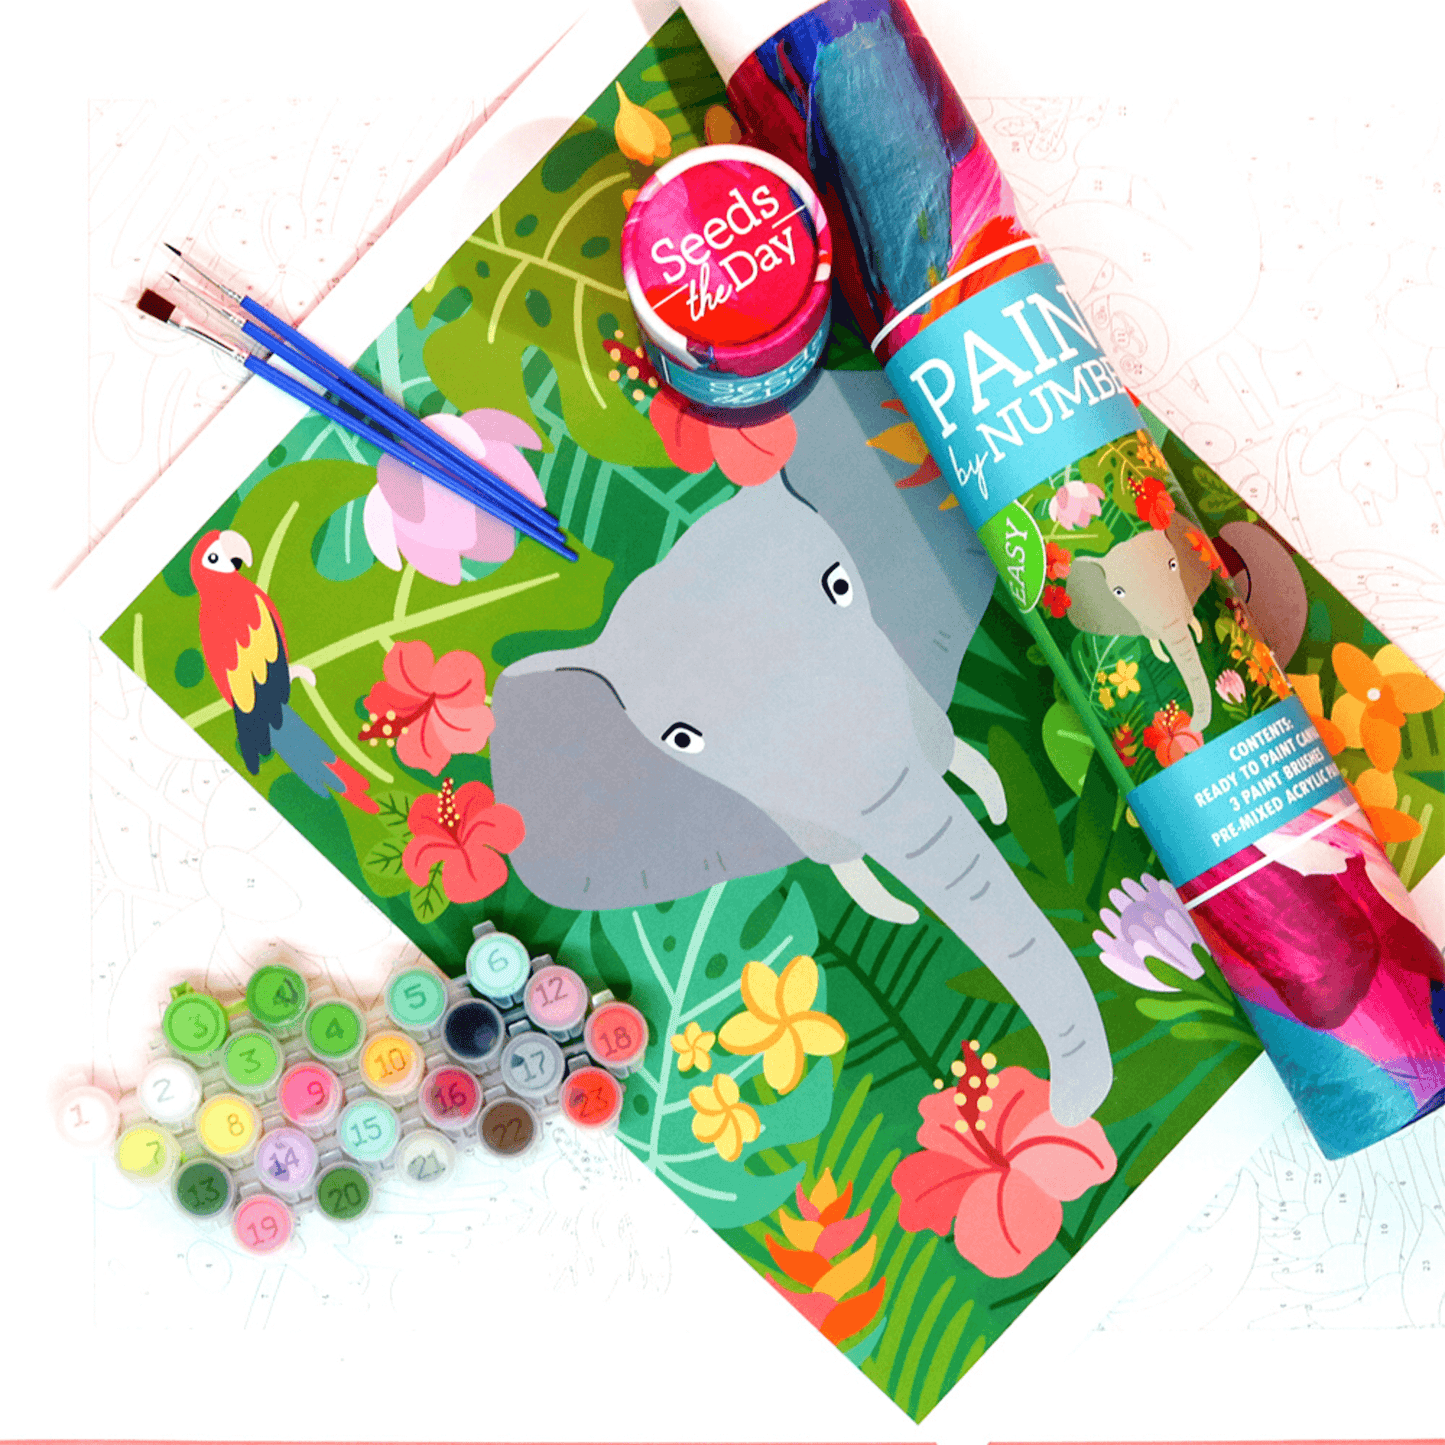 https://essentialgifting.com/products/art-elephant-diy-paint-by-number-kids-painting-craft-kits